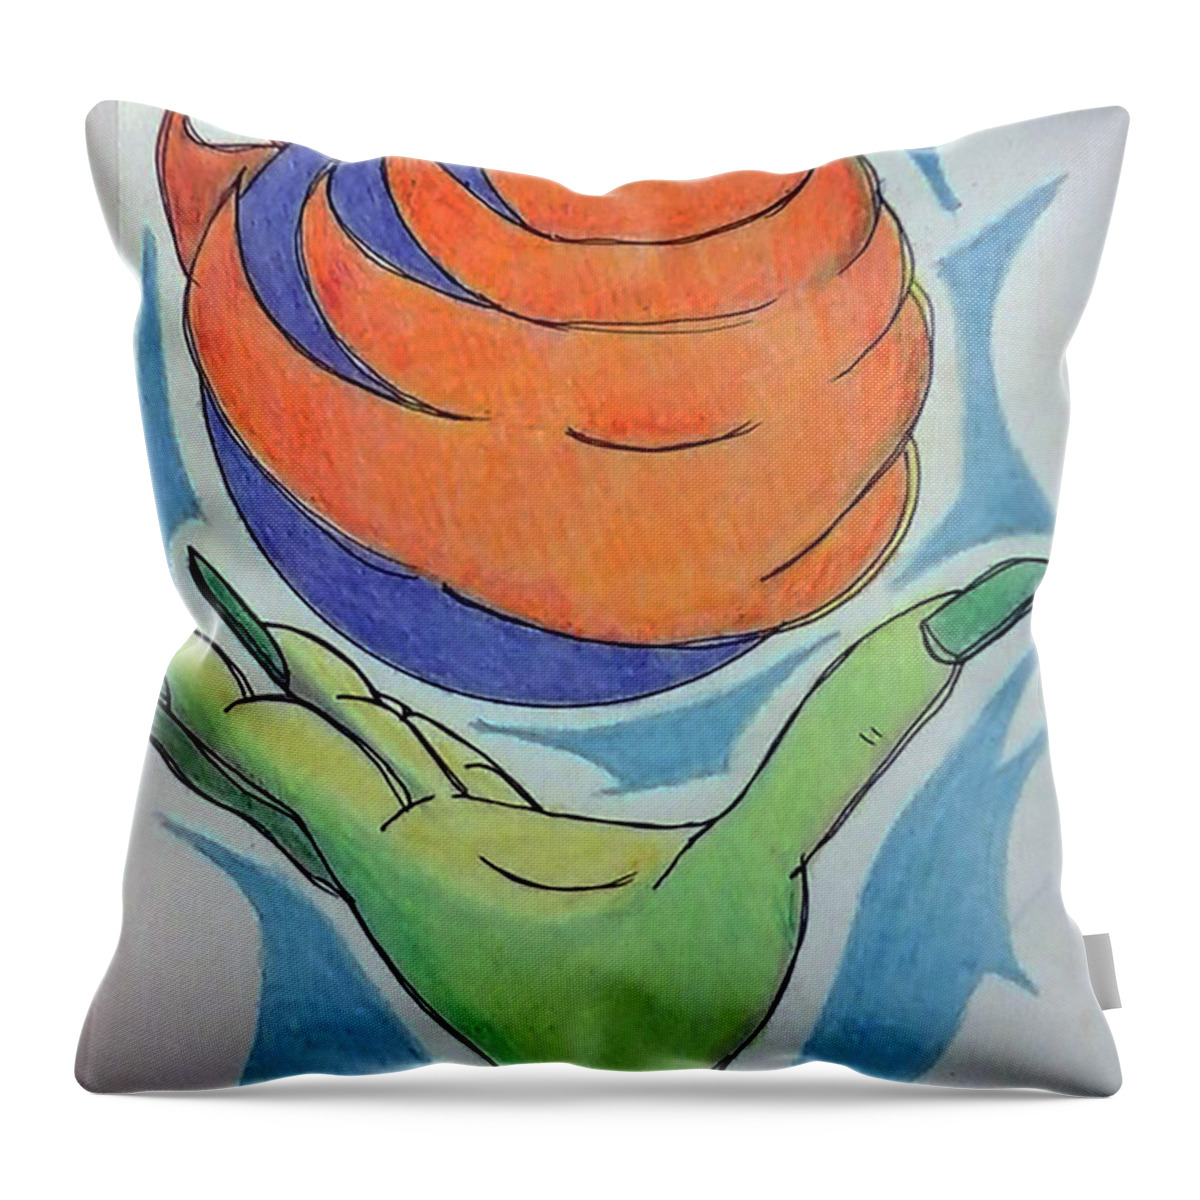 Art Throw Pillow featuring the drawing Wicket Fireball by Loretta Nash